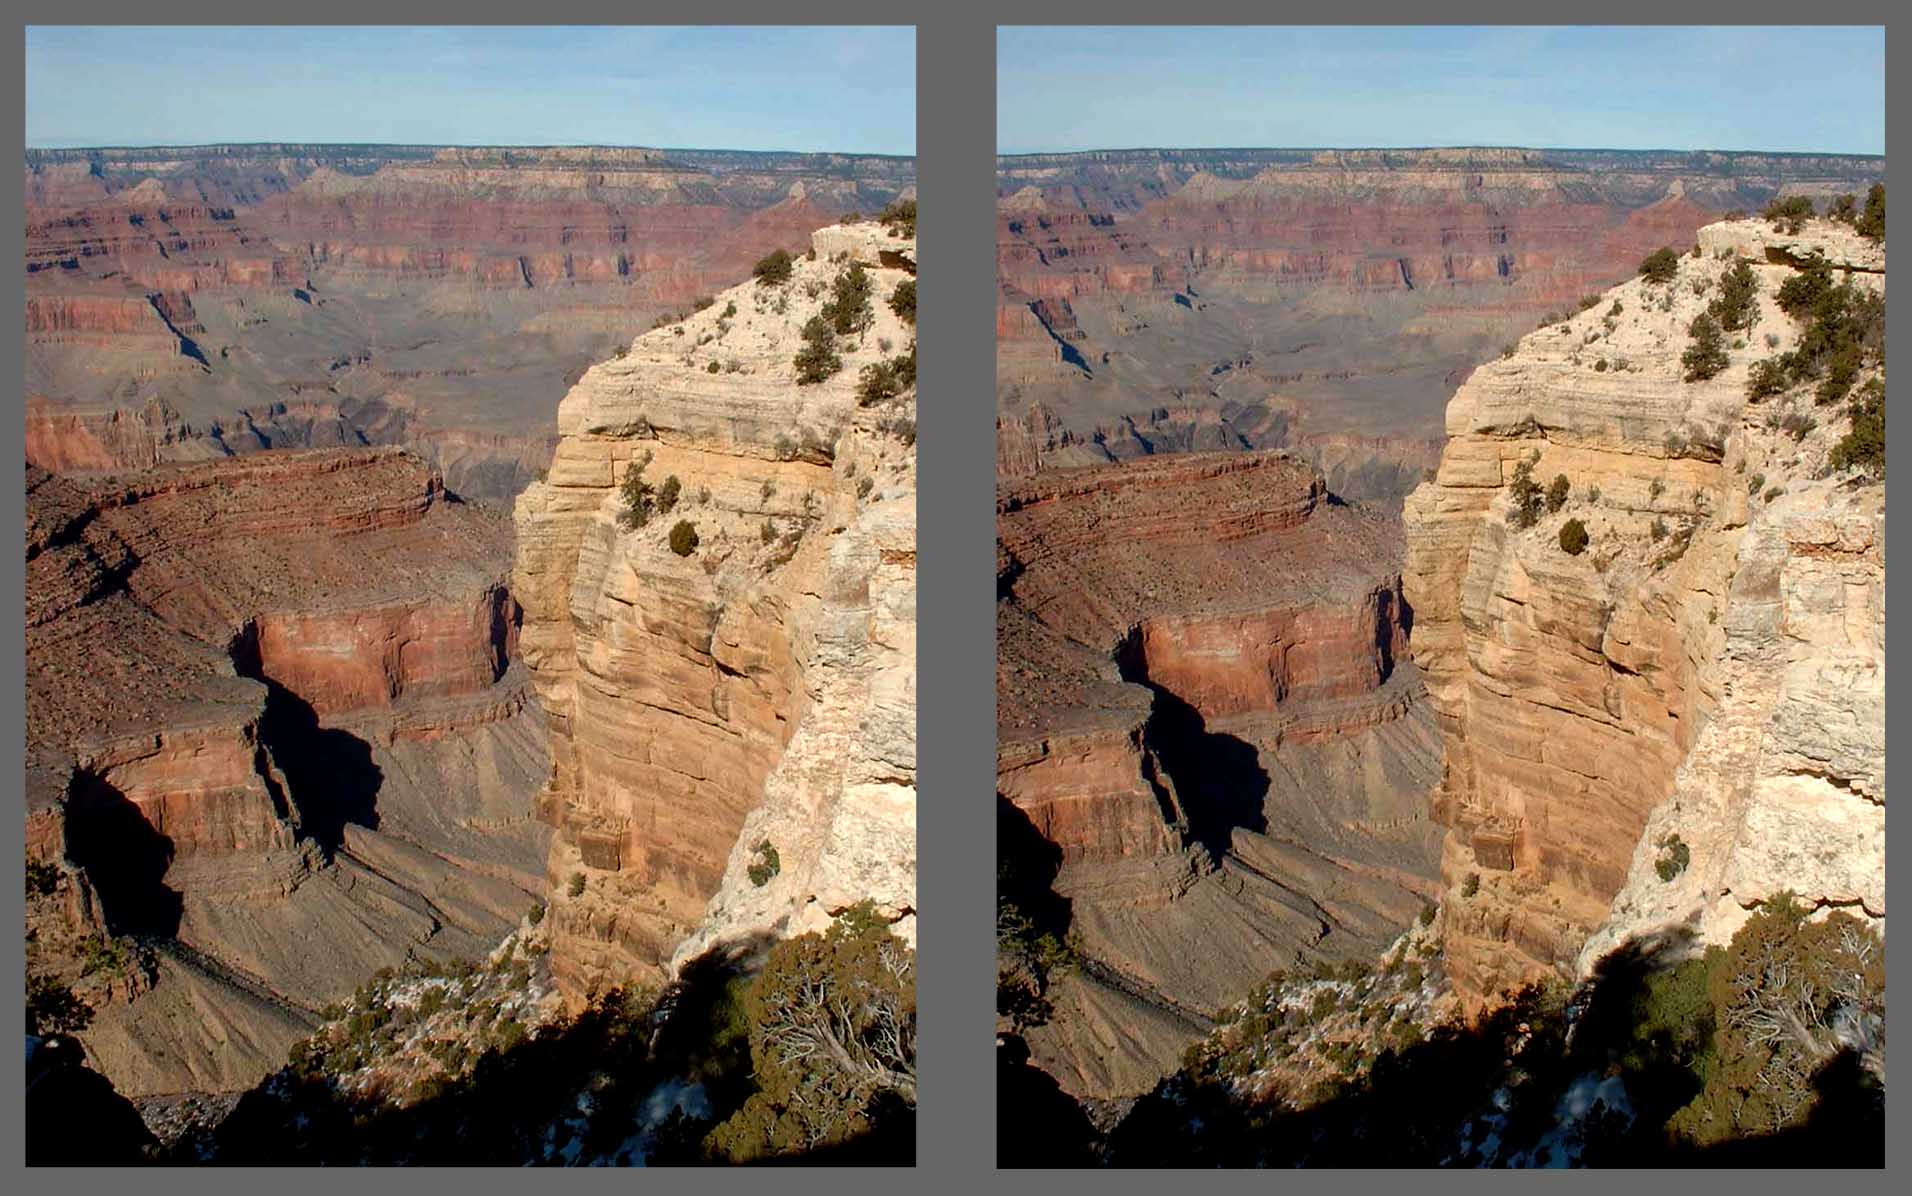 Stereo Photo - Grand Canyon View B - Cross-eyed viewing method